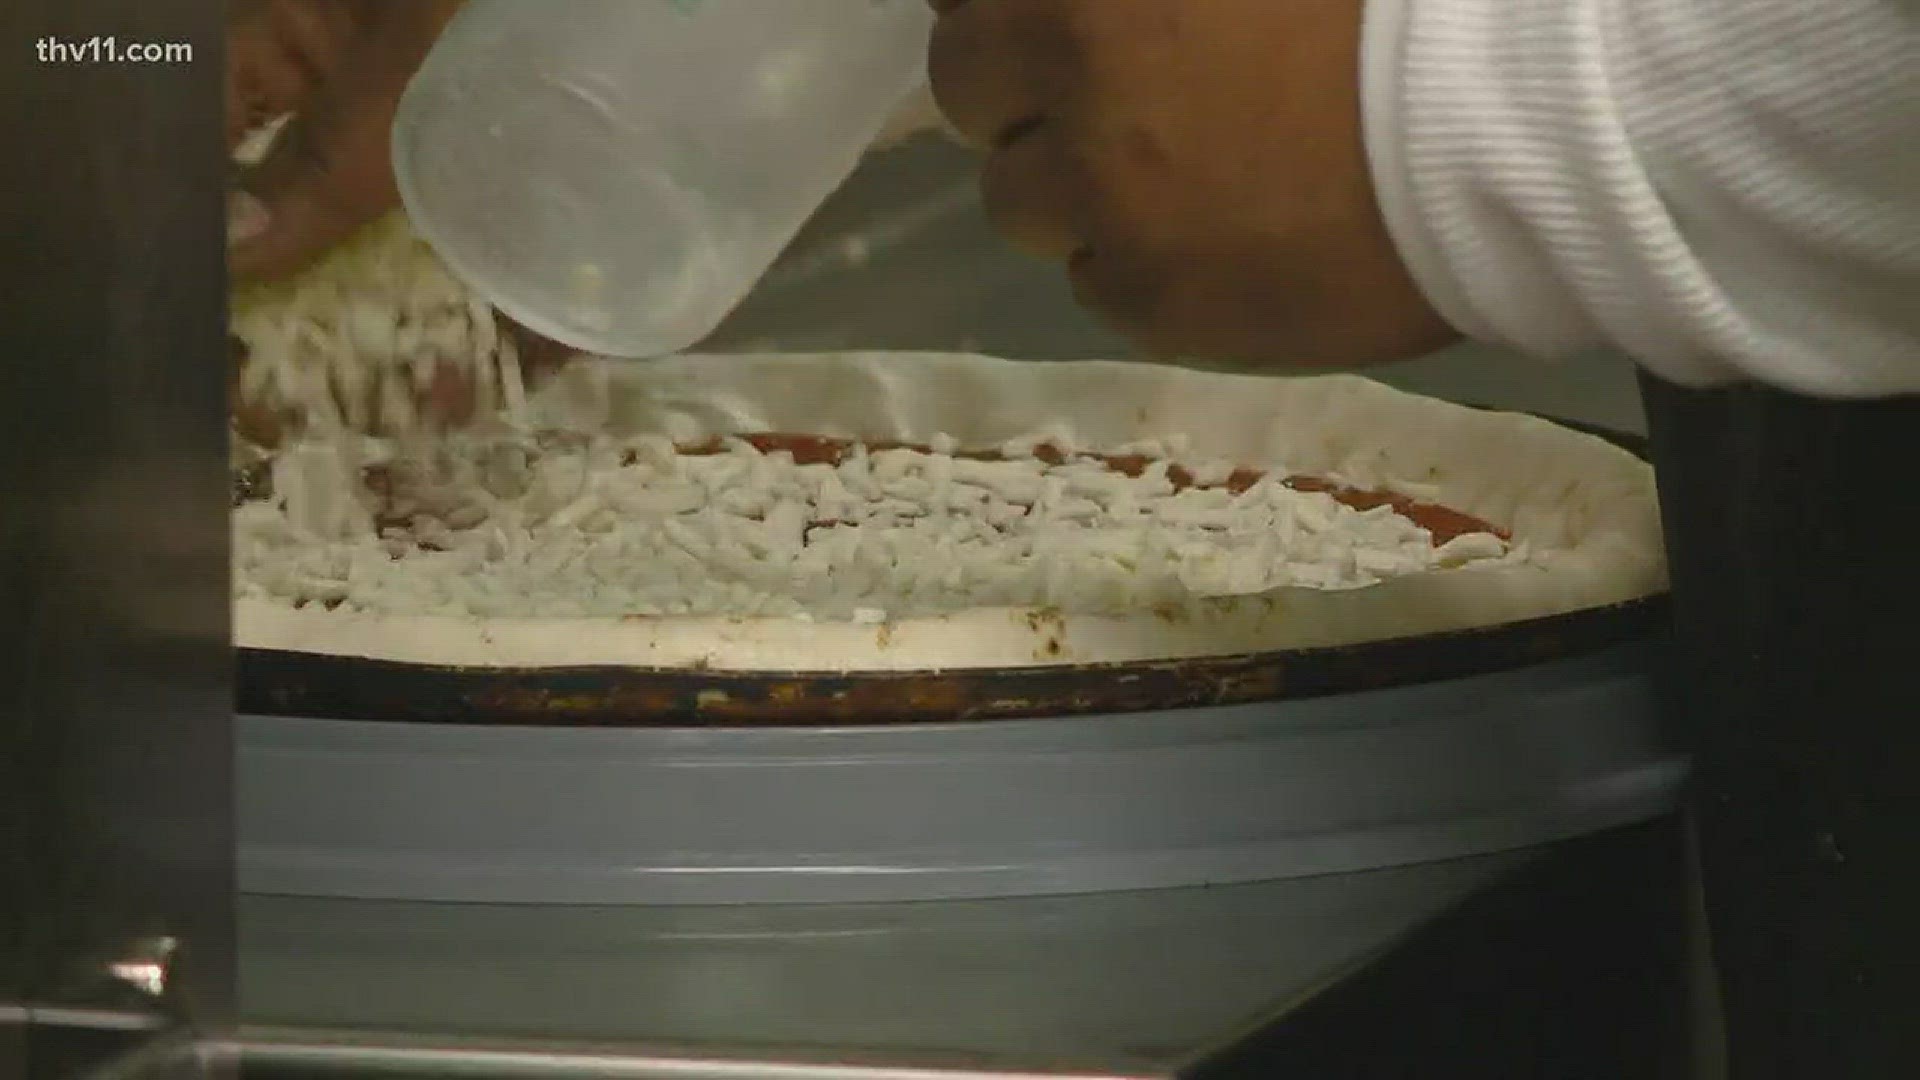 The National Restaurant Assocation says 1-in-8 Americans will get take-out or delivery today, most will get pizza.